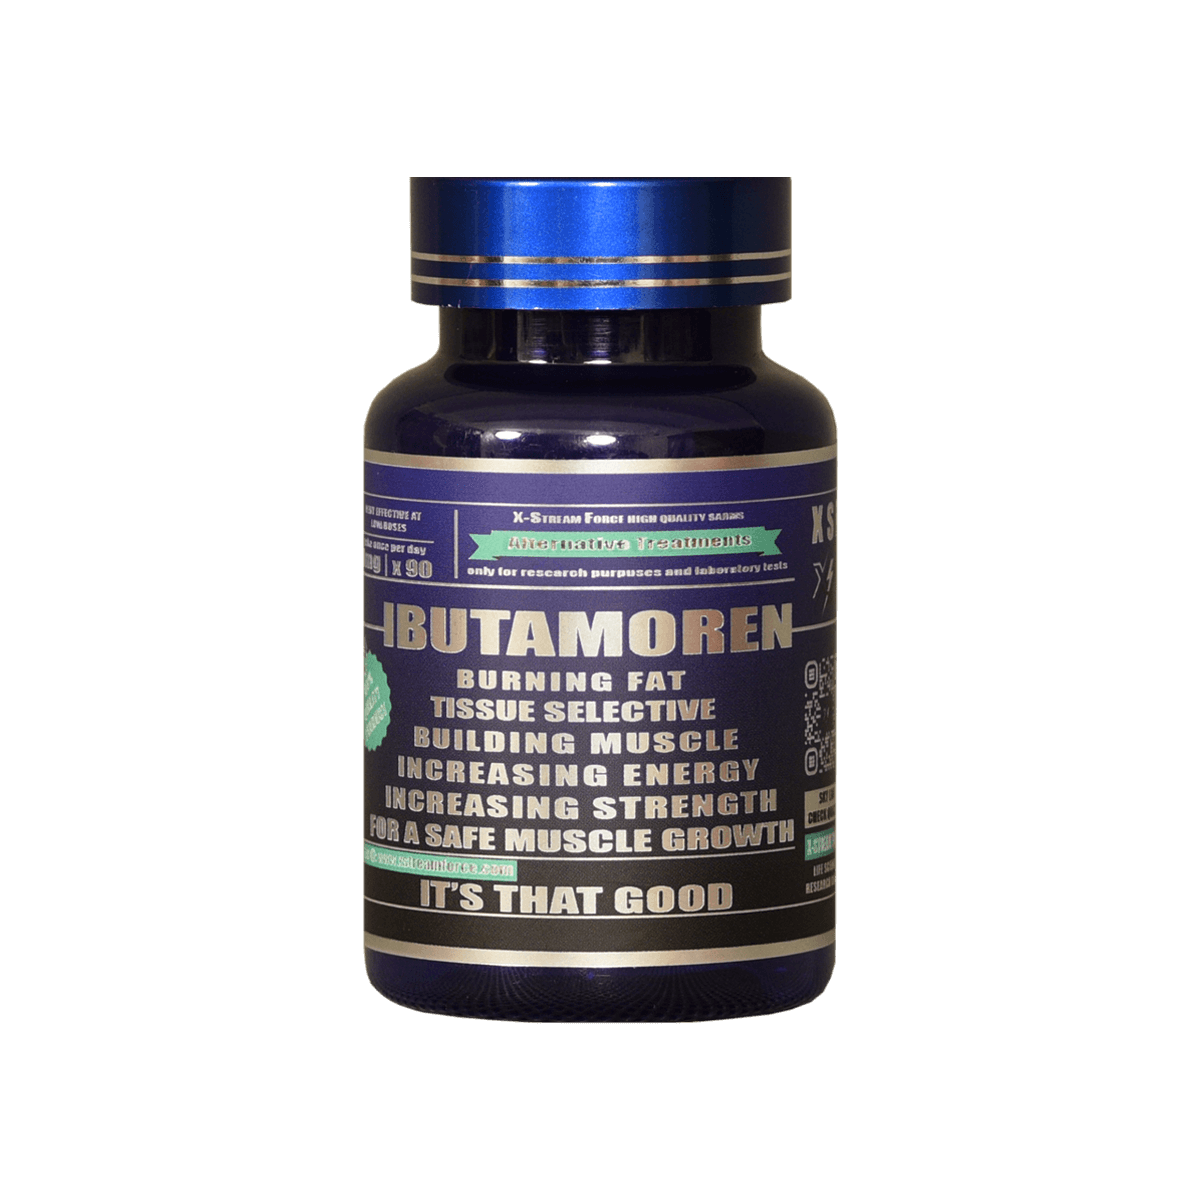 ibutamoren-mk677-capsules-sarm-900mg-muscle shop-xstreamforce-for recomp-rejuvenation-strength-volume✦mk677 sarms✦ fitness supplements-muscle-hunter